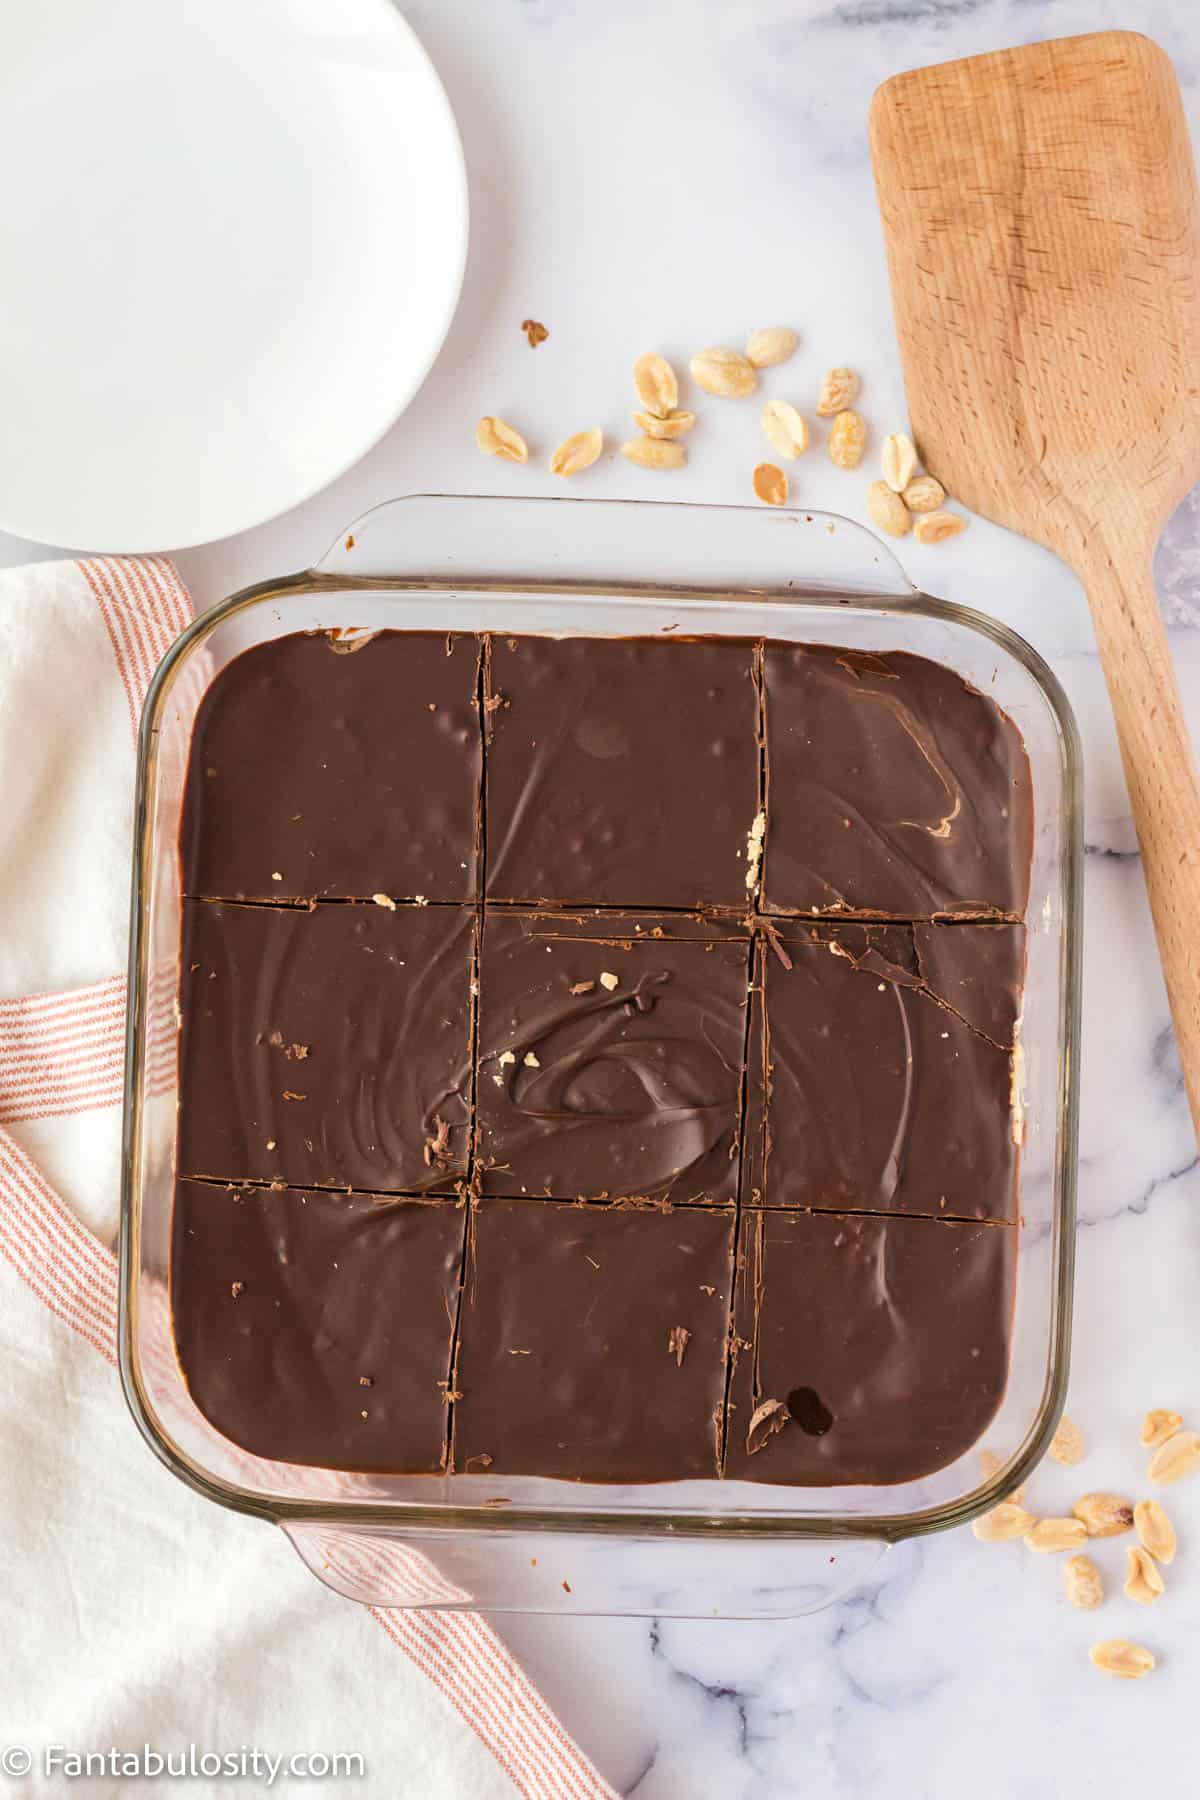 An 8x8 square pan with chocolate peanut butter bars in it.